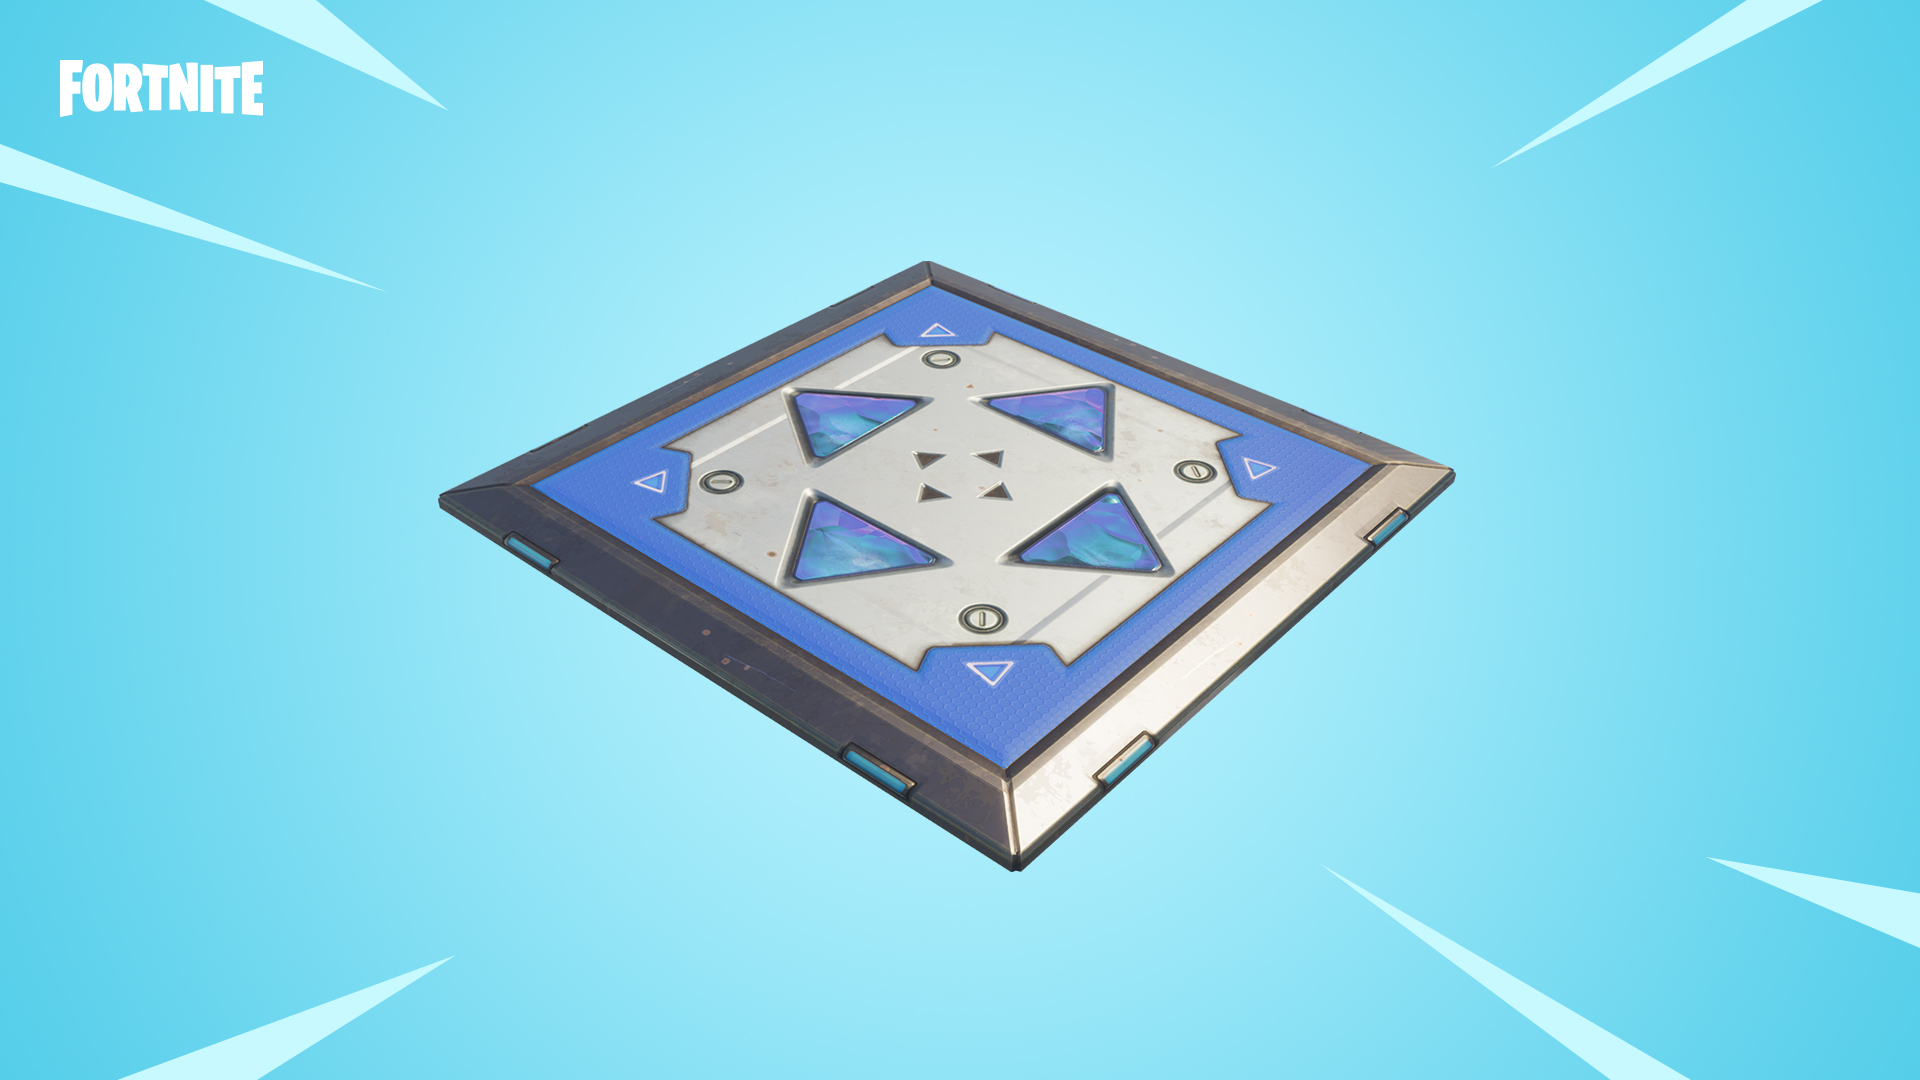 What Are Bouncers In Fortnite The Bouncer Trap Has Returned To Fortnite Battle Royale Dot Esports